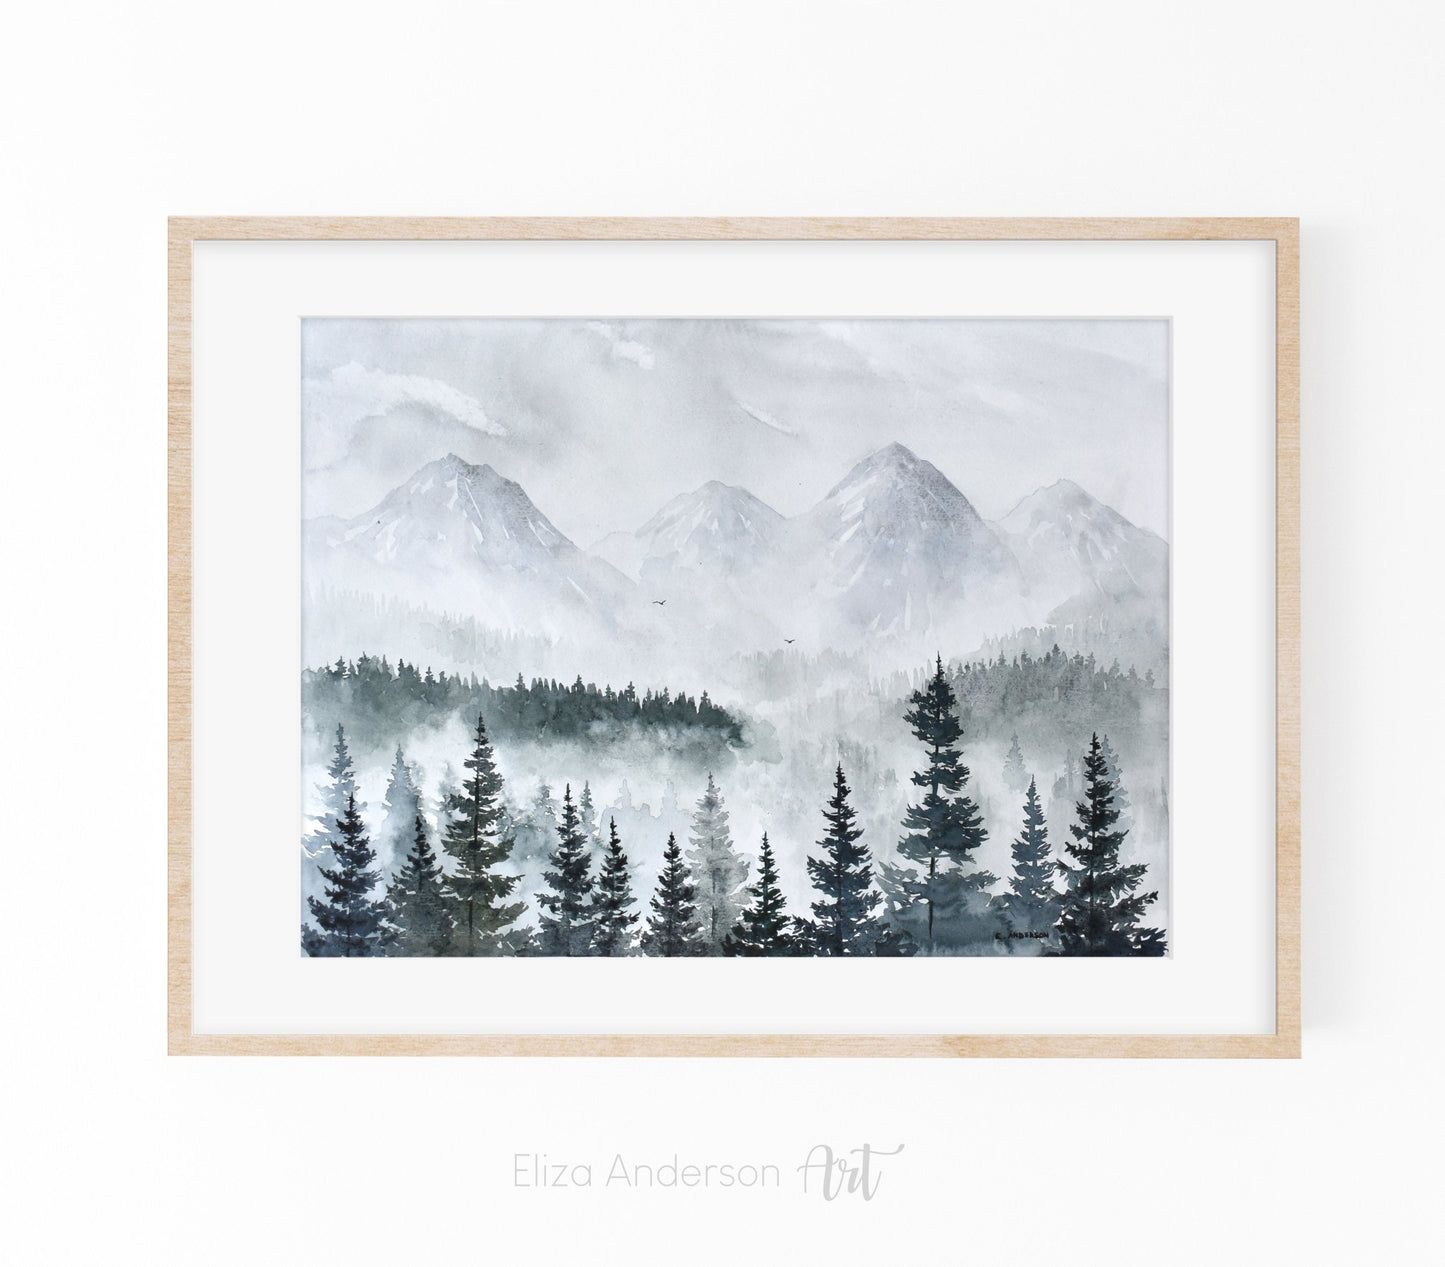 ORIGINAL watercolor painting of foggy forest and mountains, Forest painting 11 x 15 inches, Black and white painting, Eliza Anderson Art - Eliza Anderson ArtEliza Anderson Art